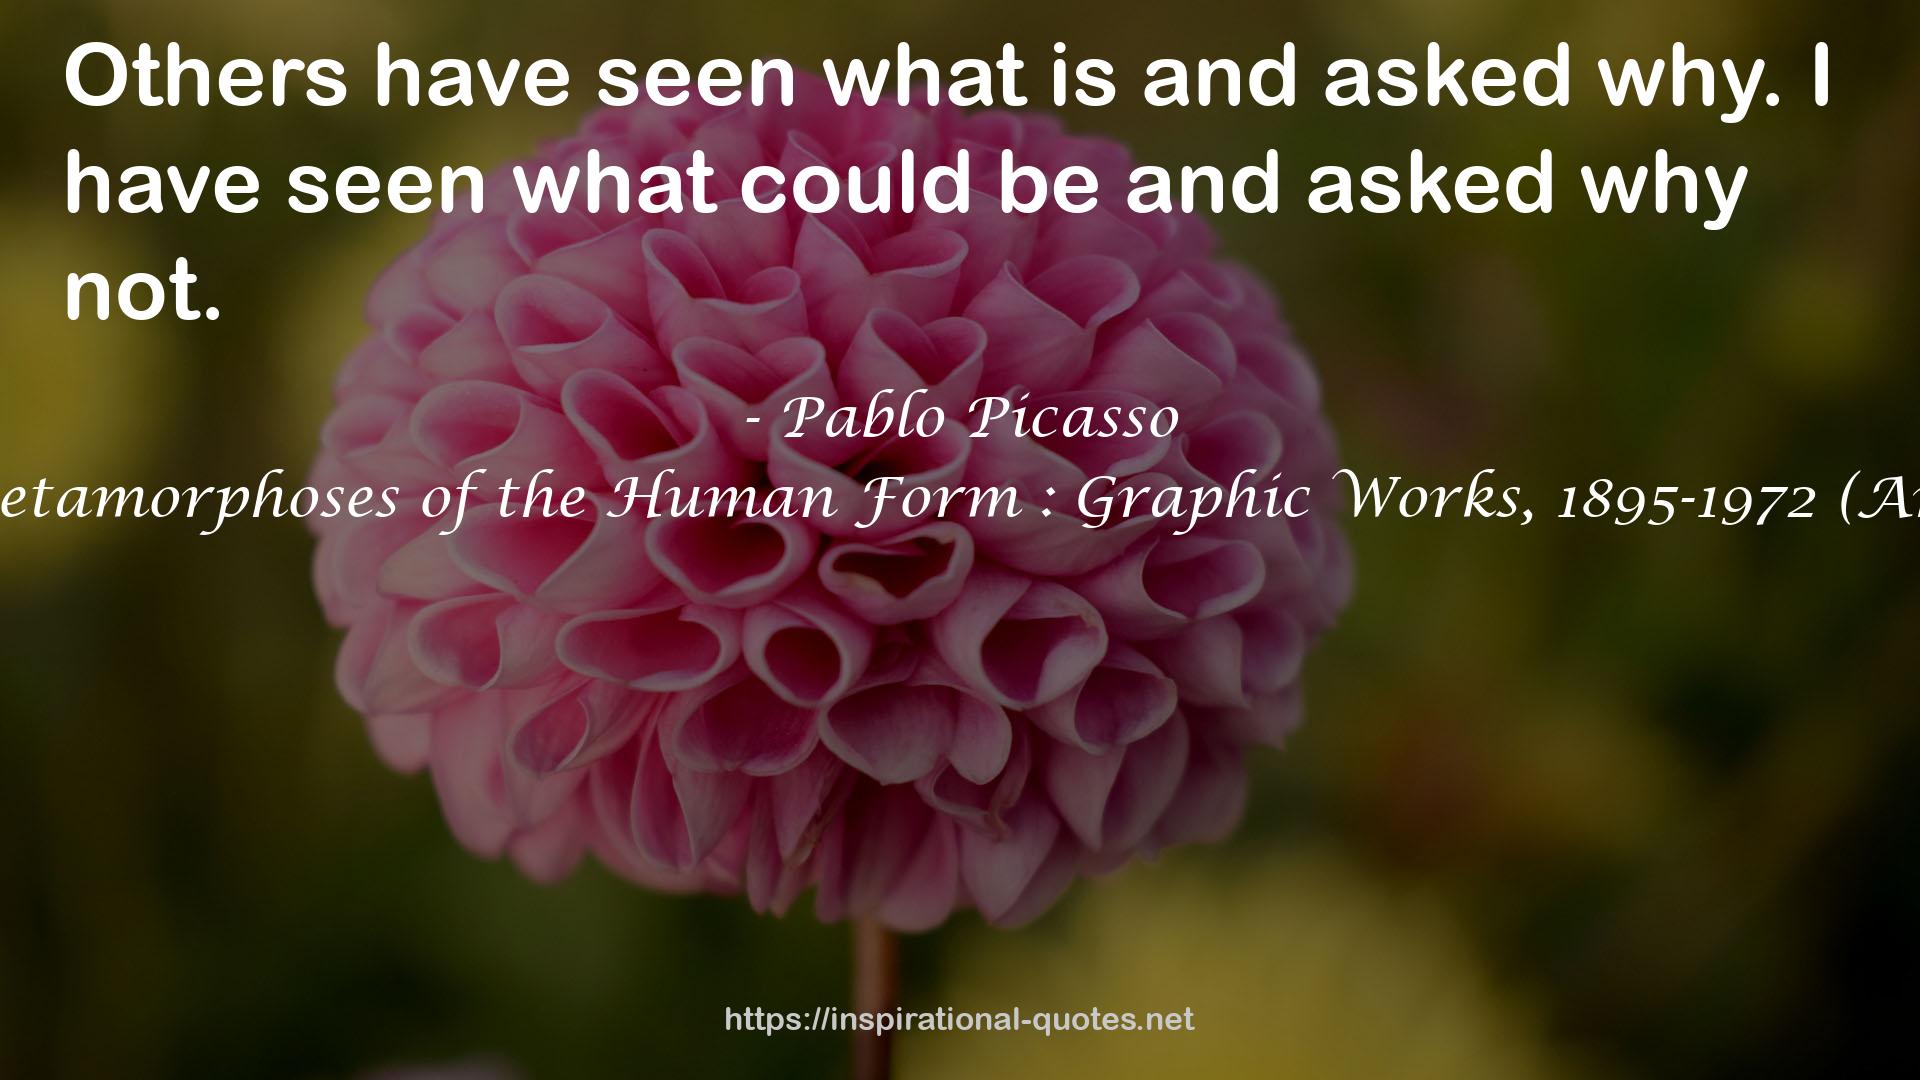 Pablo Picasso: Metamorphoses of the Human Form : Graphic Works, 1895-1972 (Art & Design) QUOTES